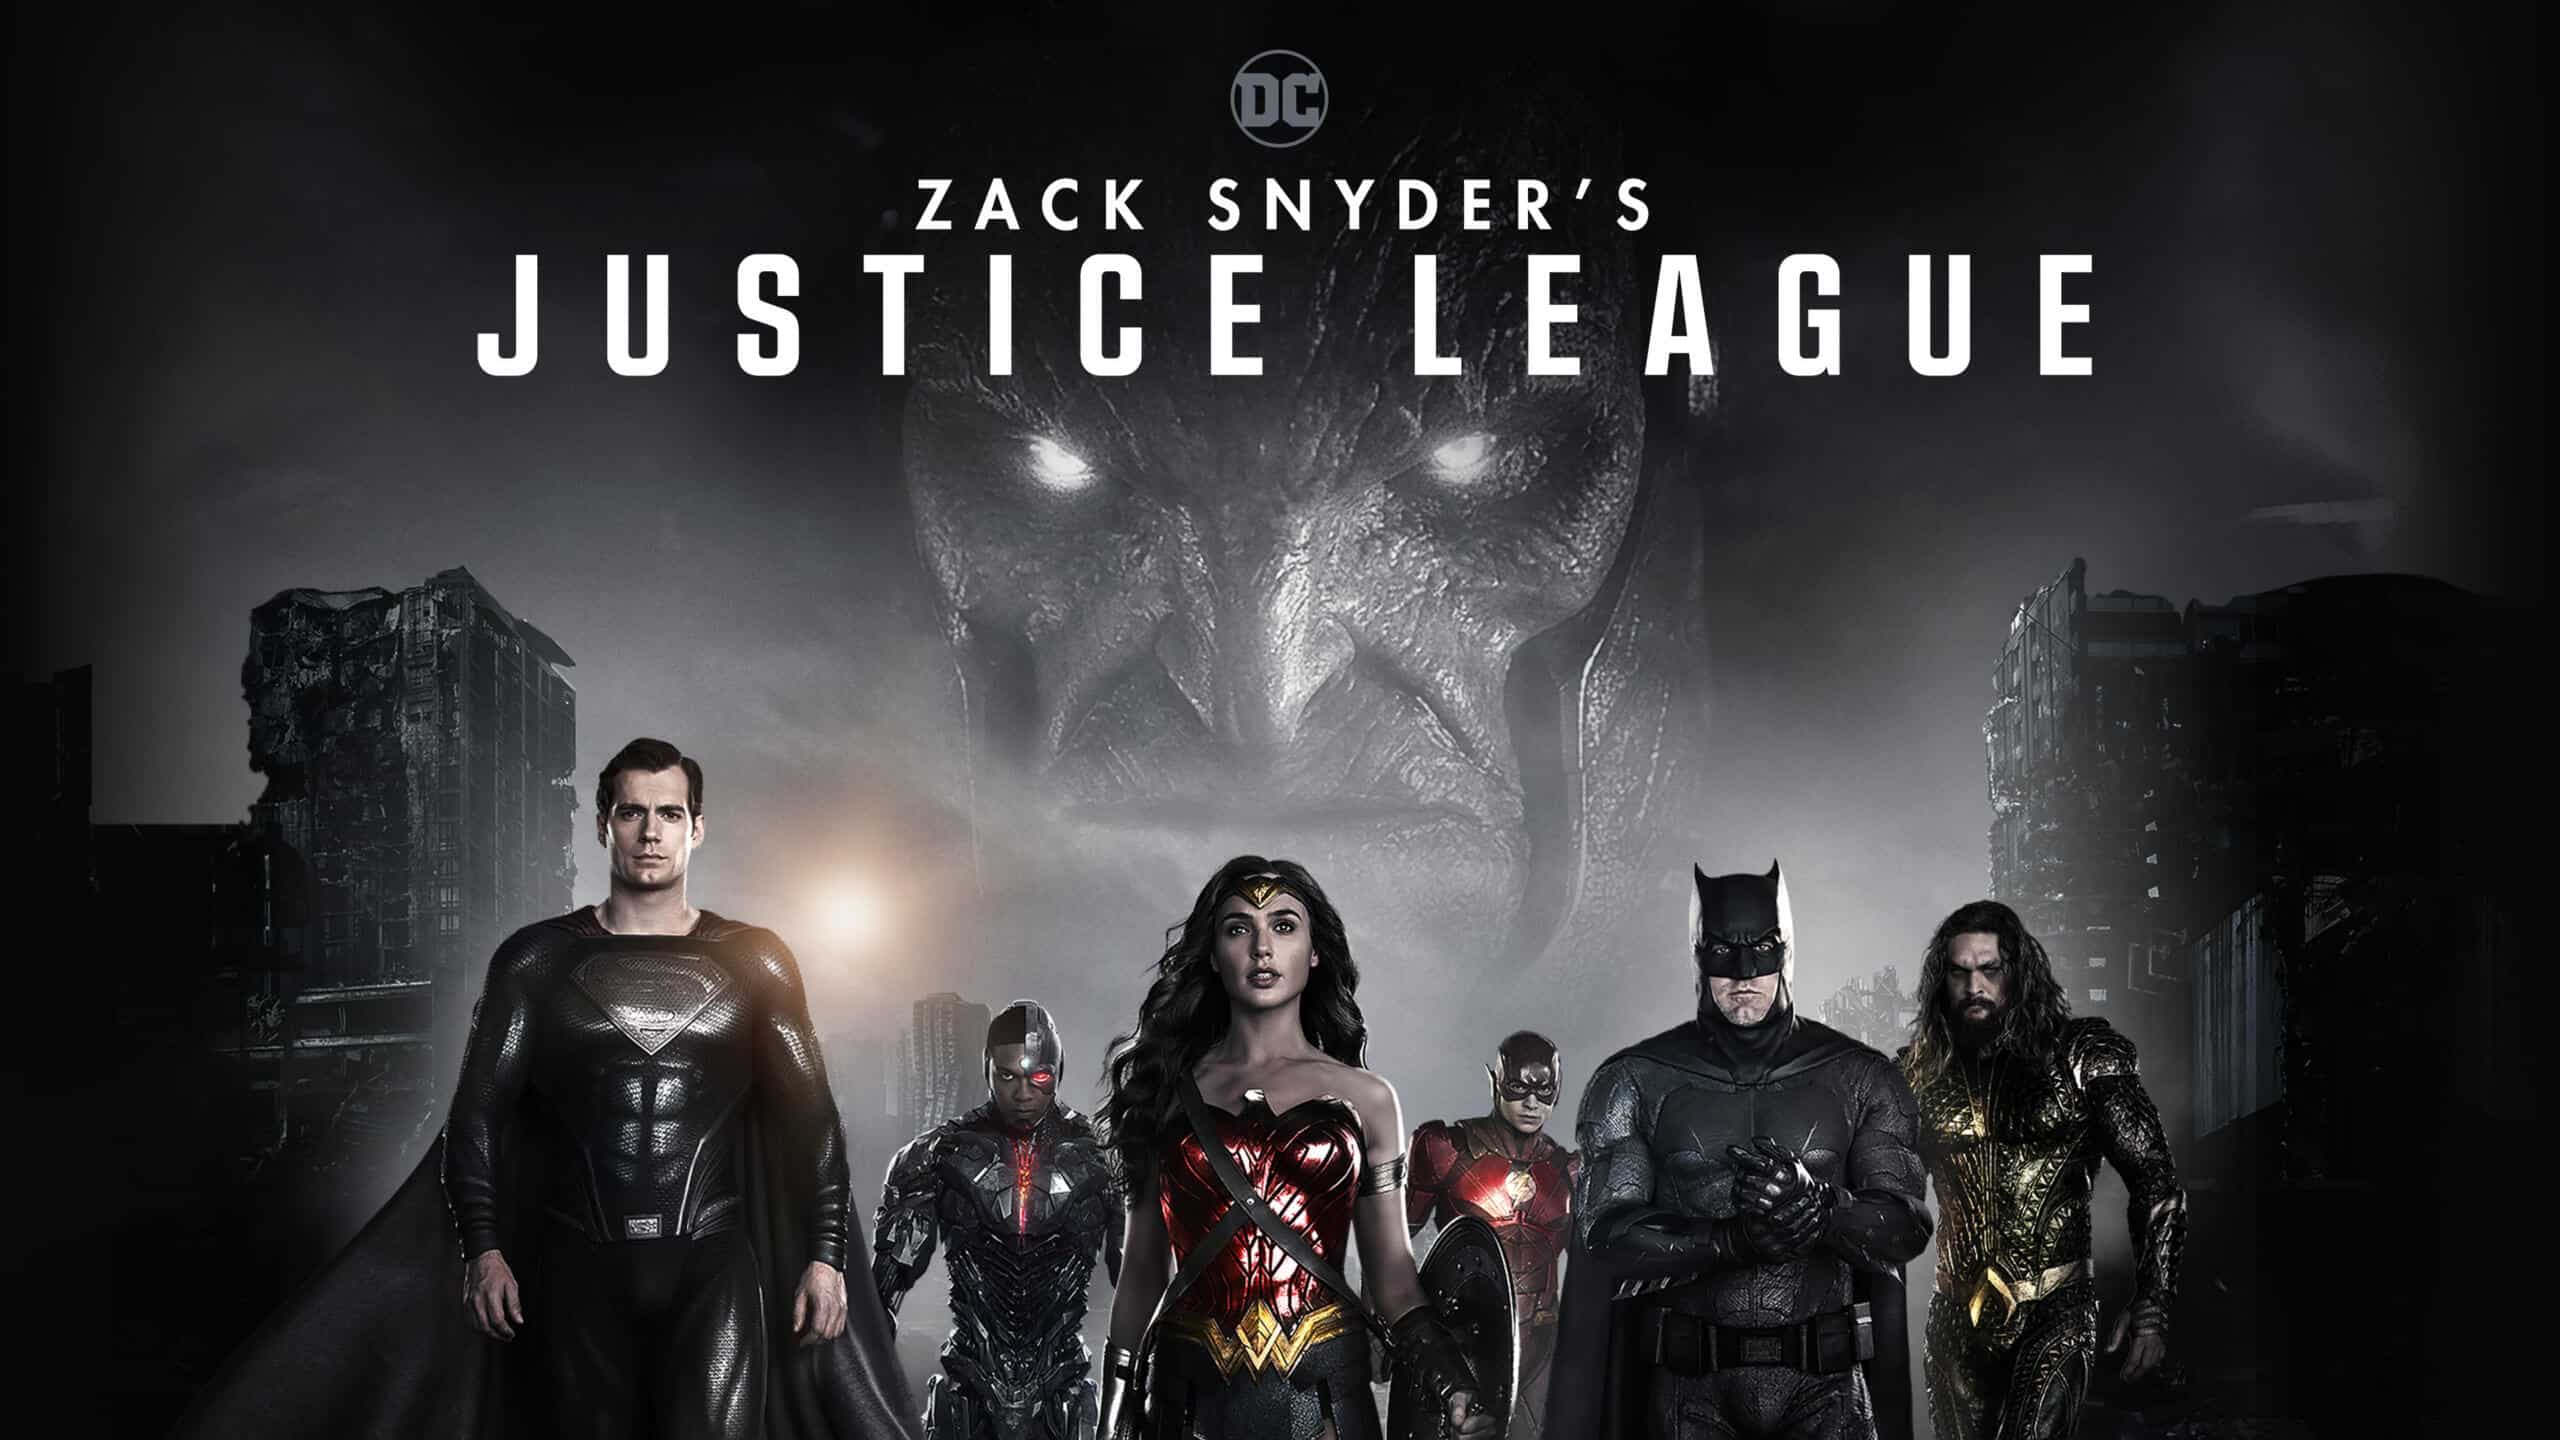 7art Review – Zack Snyder’s Justice League